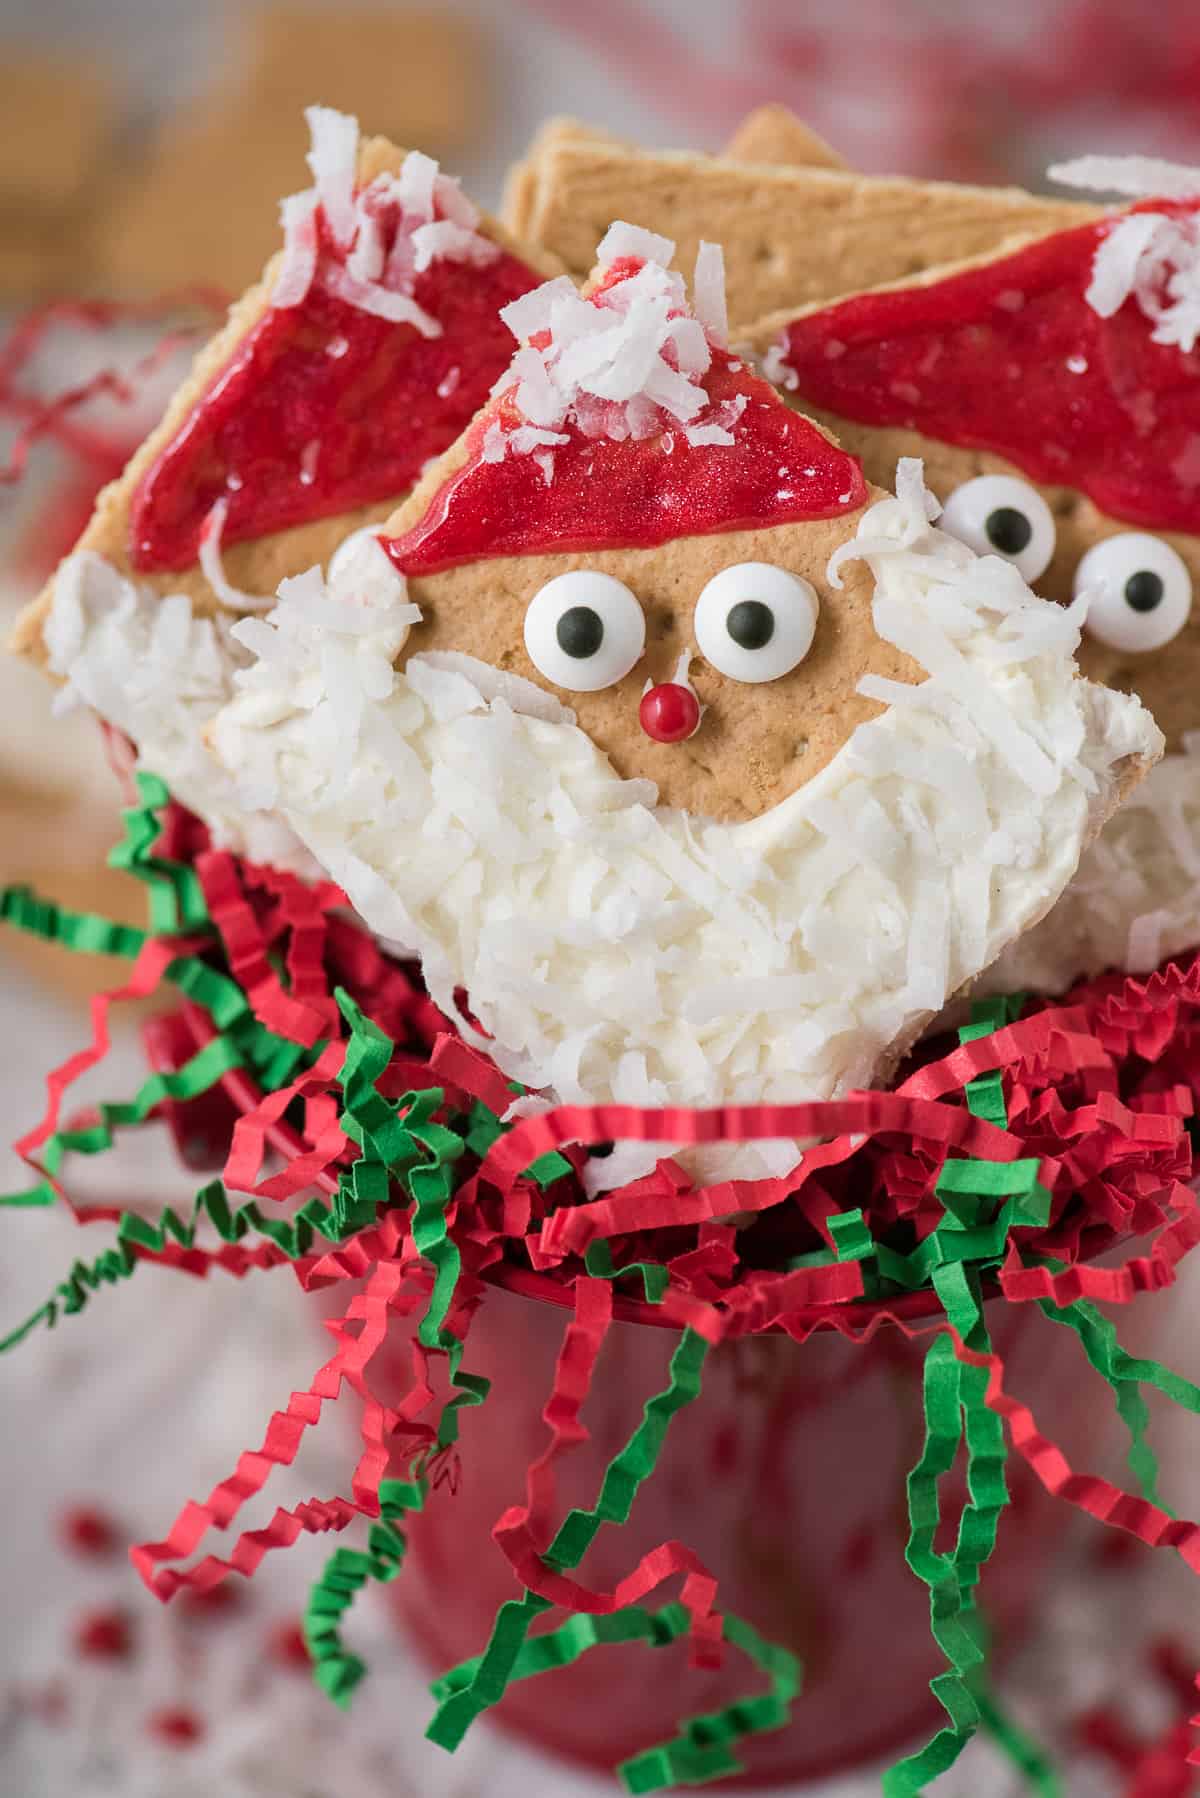 graham cracker squares decorated with frosting to look like Santa